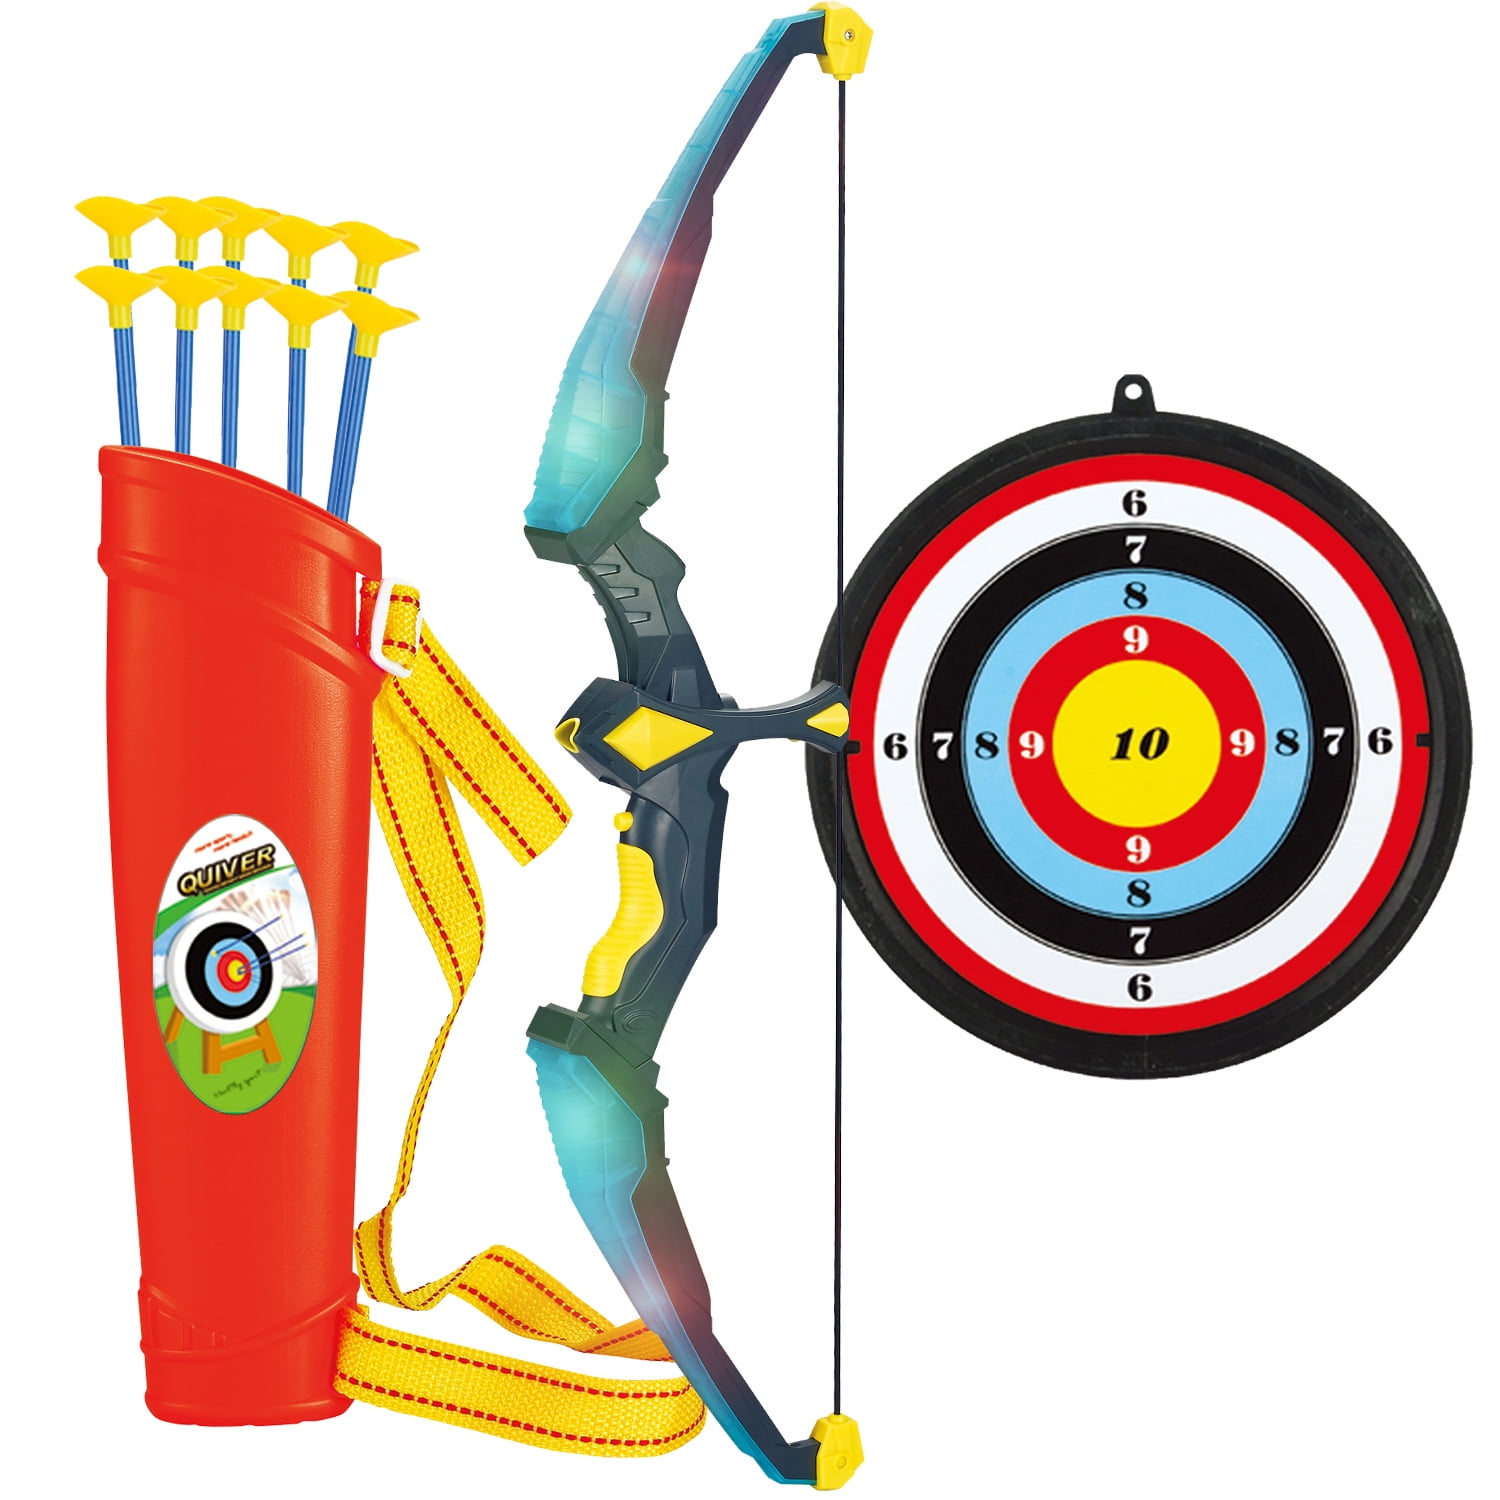 NeatoTek 2 Pack Bow and Arrow Set for Kids Kids Archery Shooting Set Toy Bow and Foam Arrow Set Great Fun Outdoor and Backyard Gift Toy for Boys and Girls 